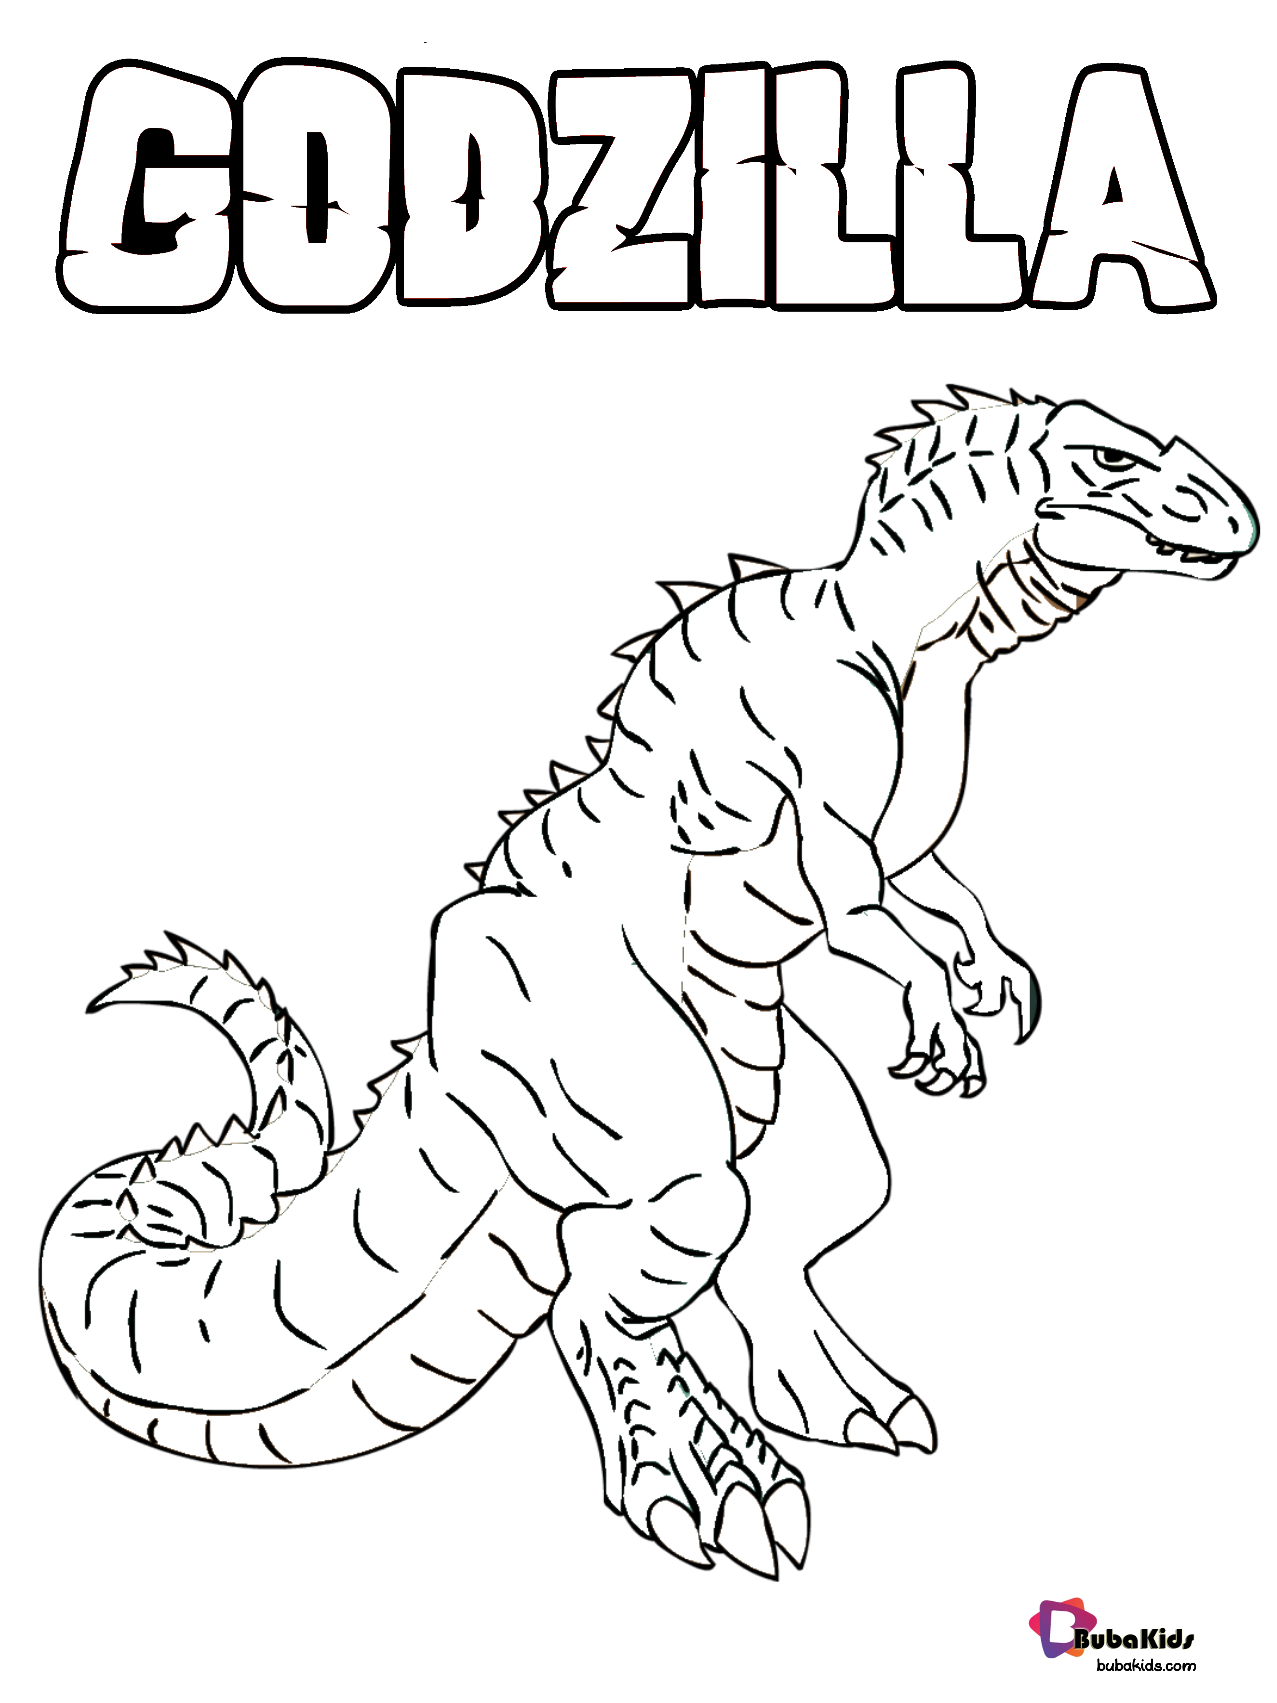 Godzilla King of the Monsters coloring page. - BubaKids.com